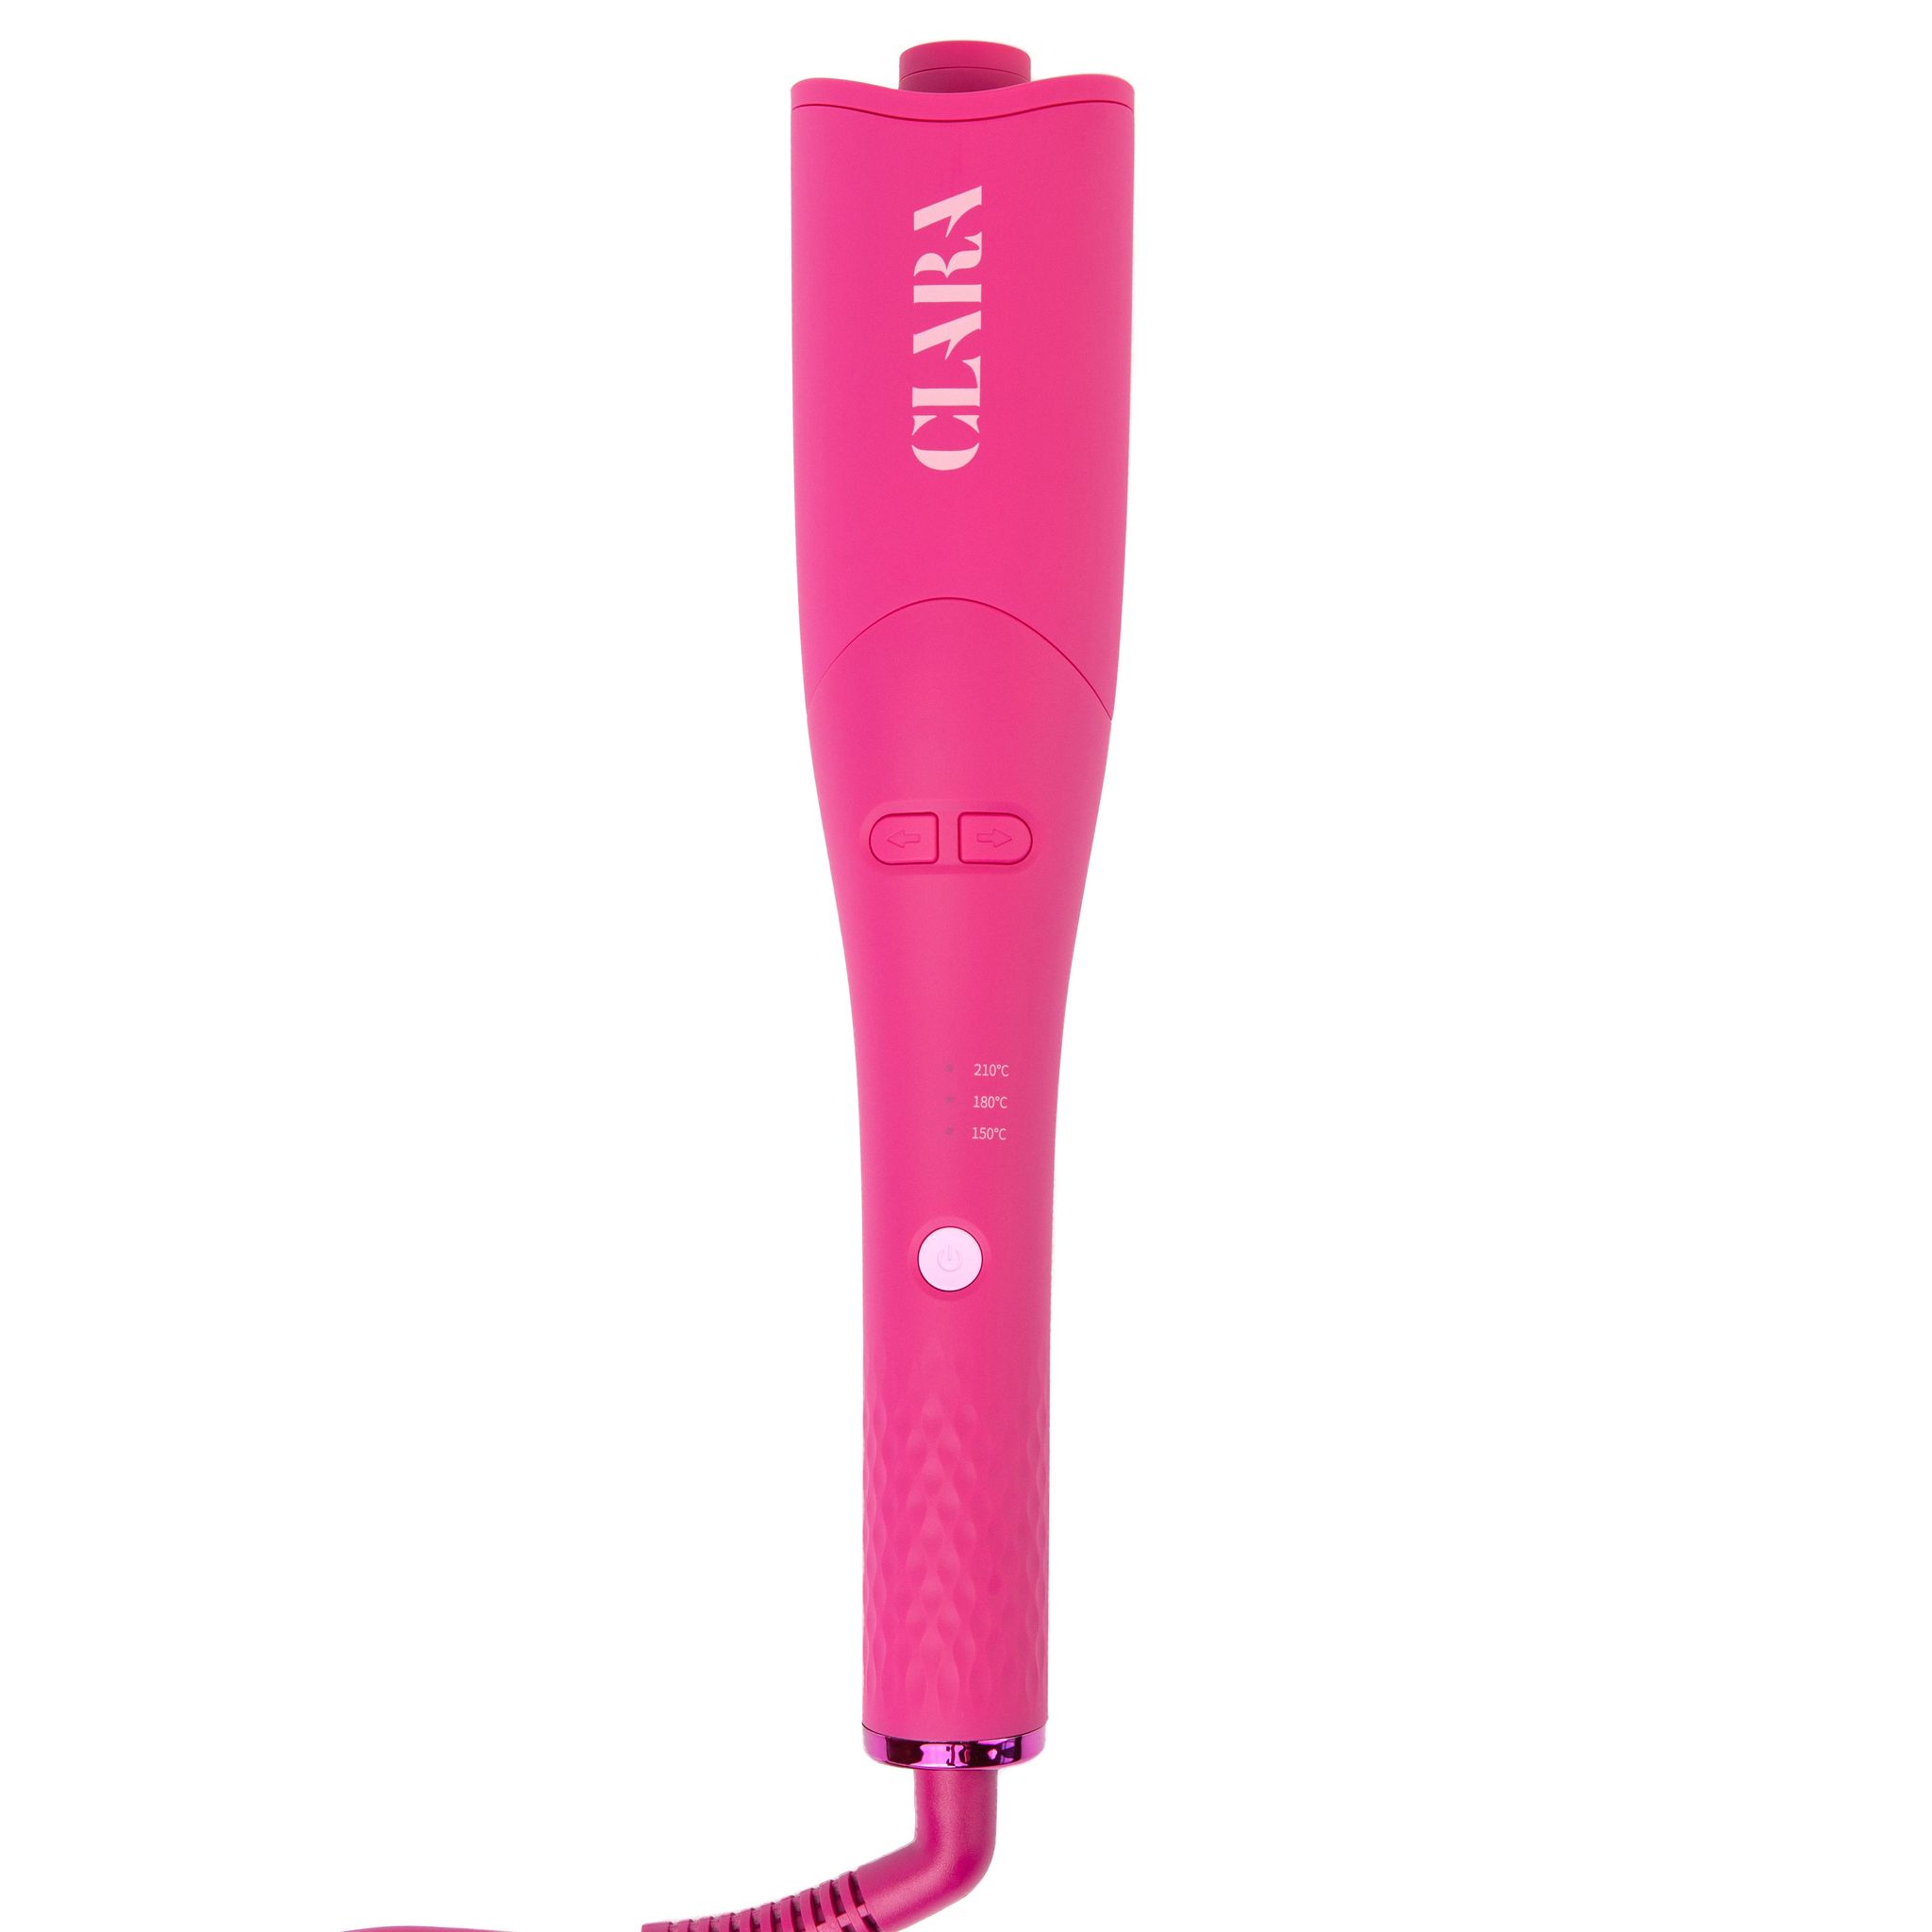 Auto-Curler Device - Pink